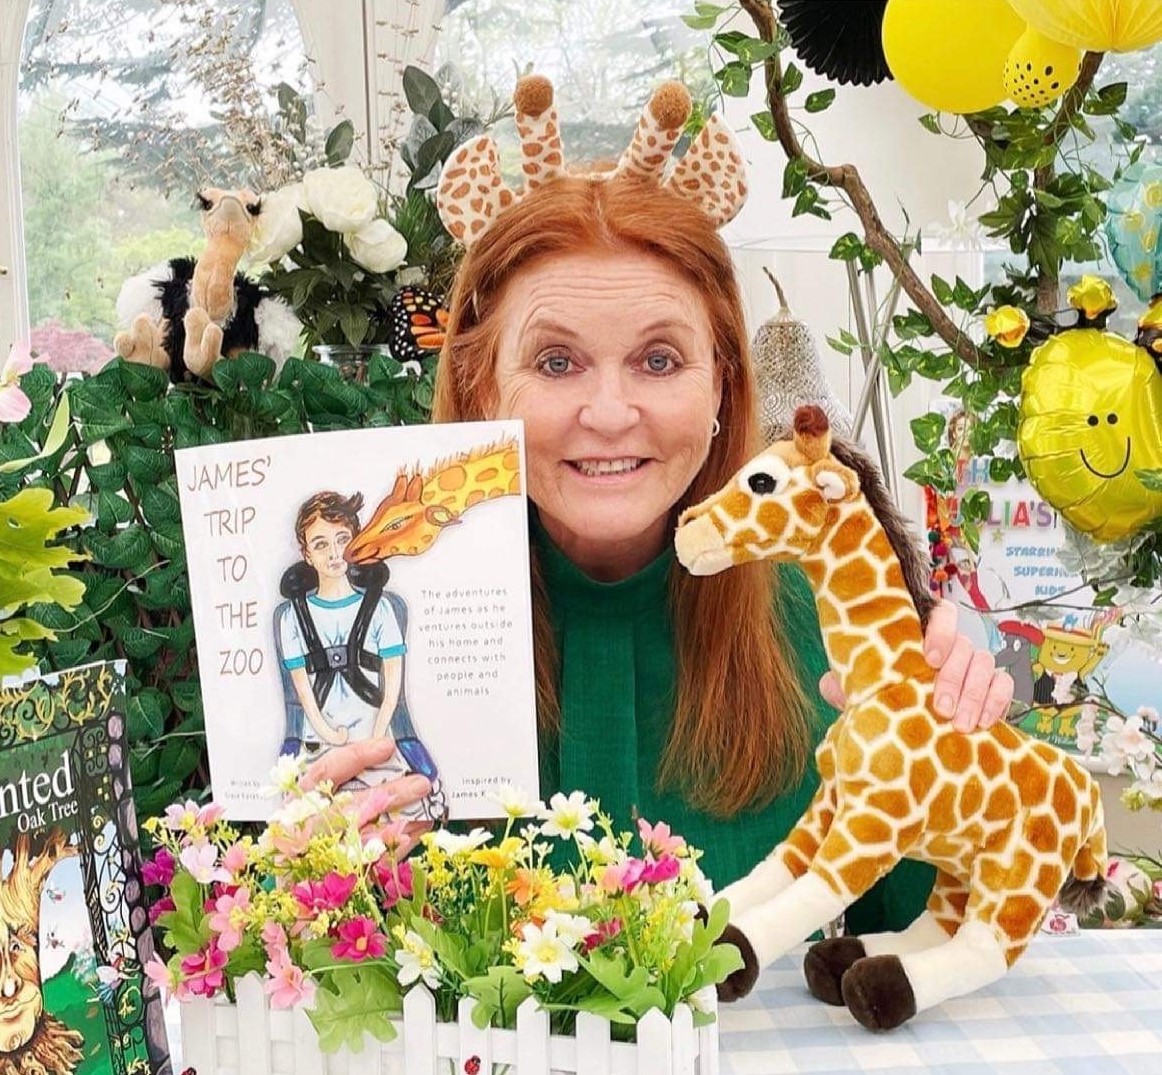 Sarah Ferguson holding children's book James Trip to the Zoo which is designed to inspire and educate people to be inclusive